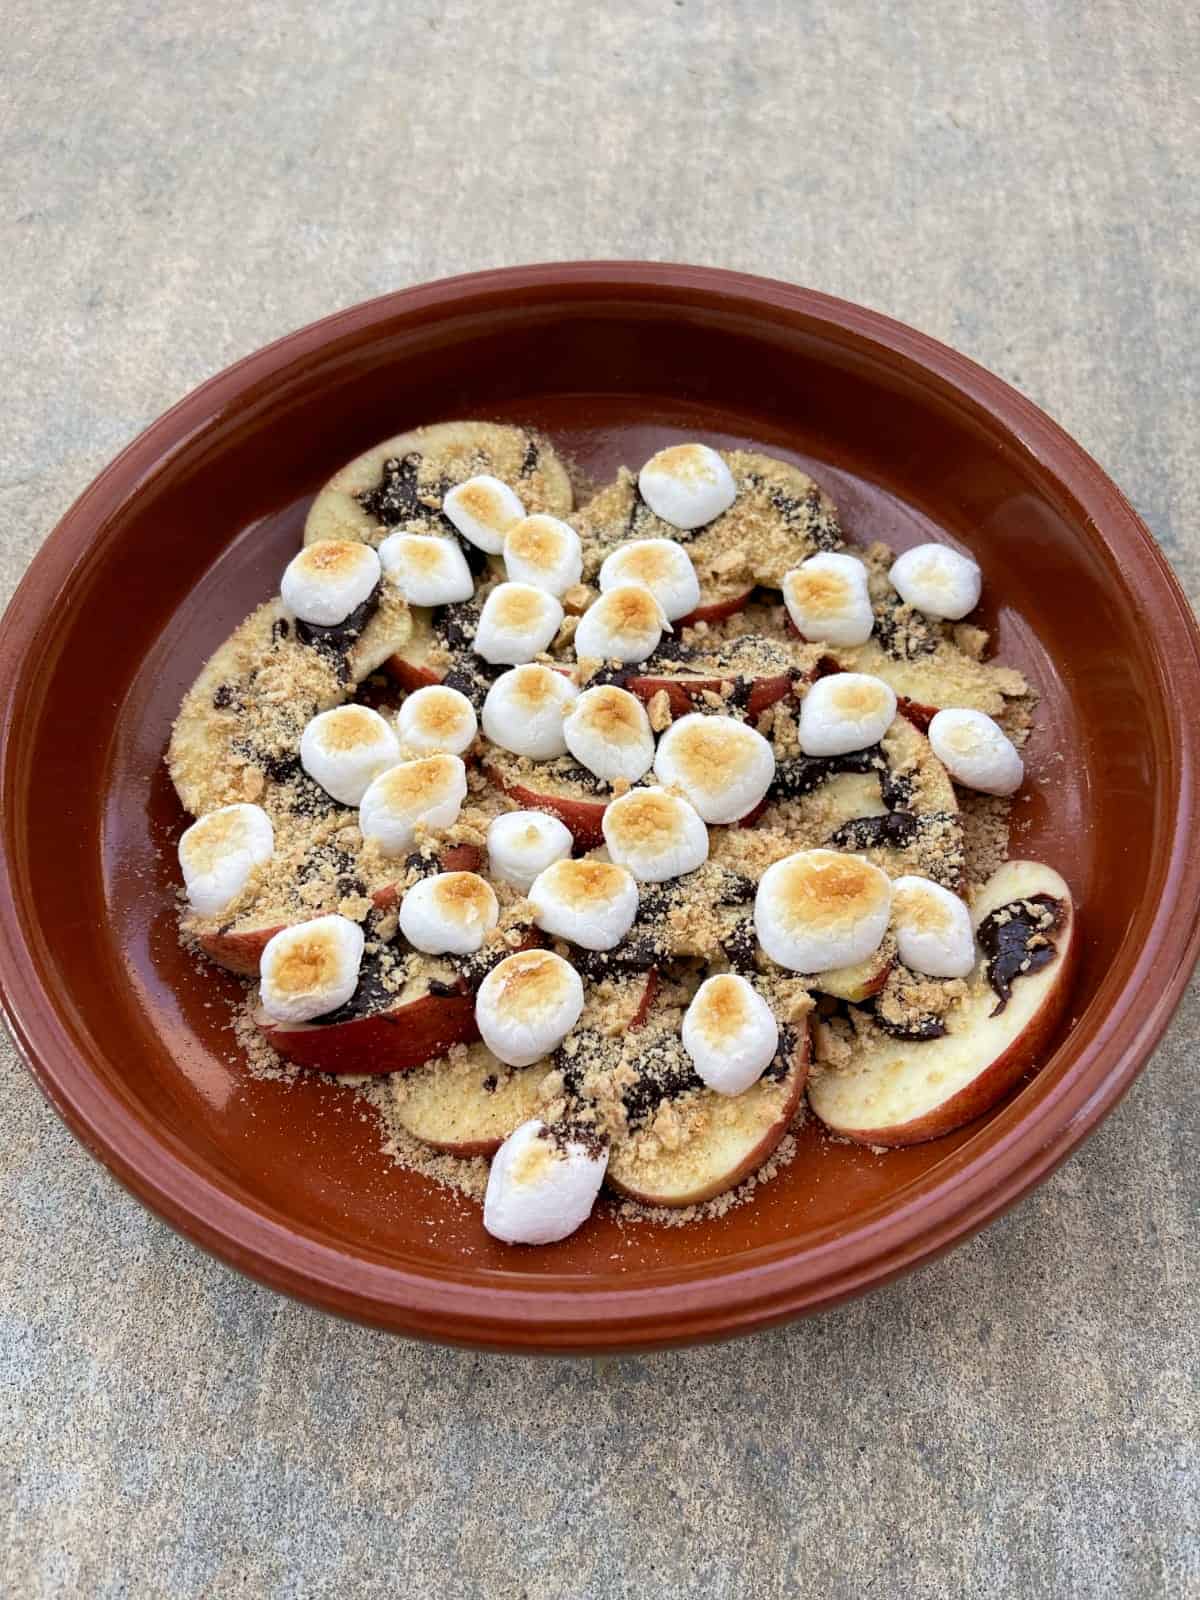 Terra cotta plate with apple s'mores nachos.